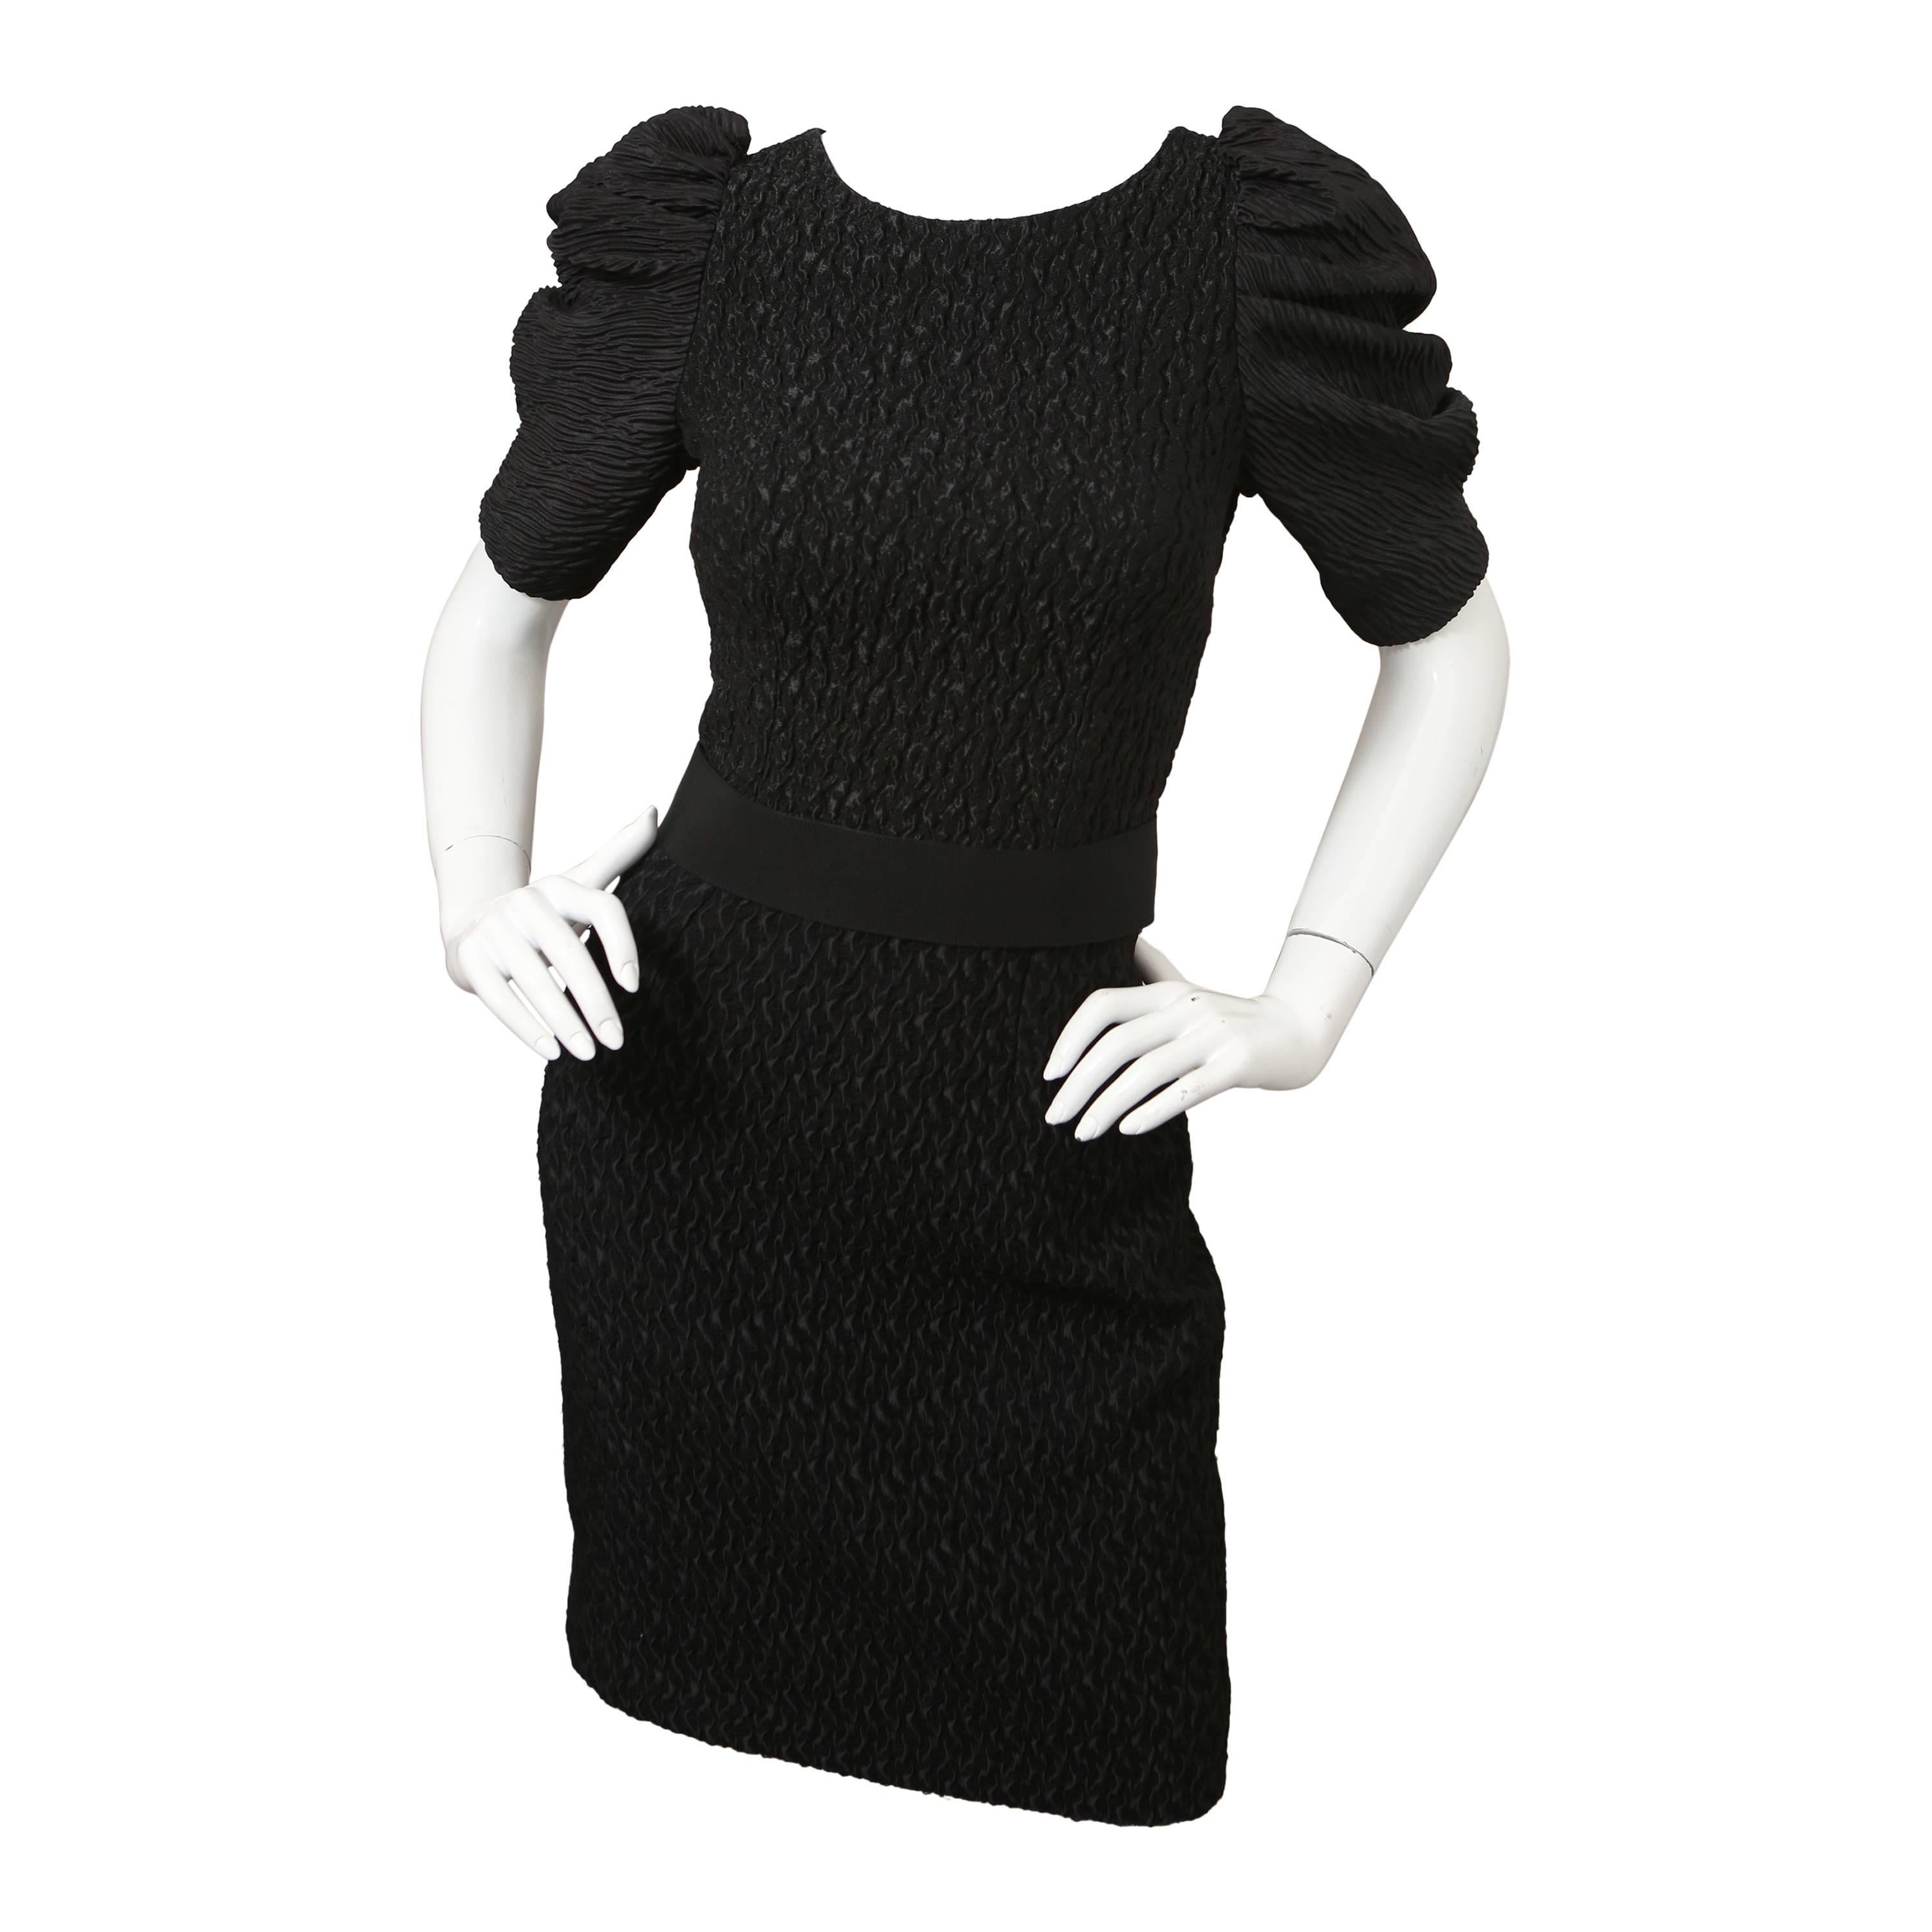 Dolce & Gabbana Puff-Sleeved Black Textured Dress with Attached Belt